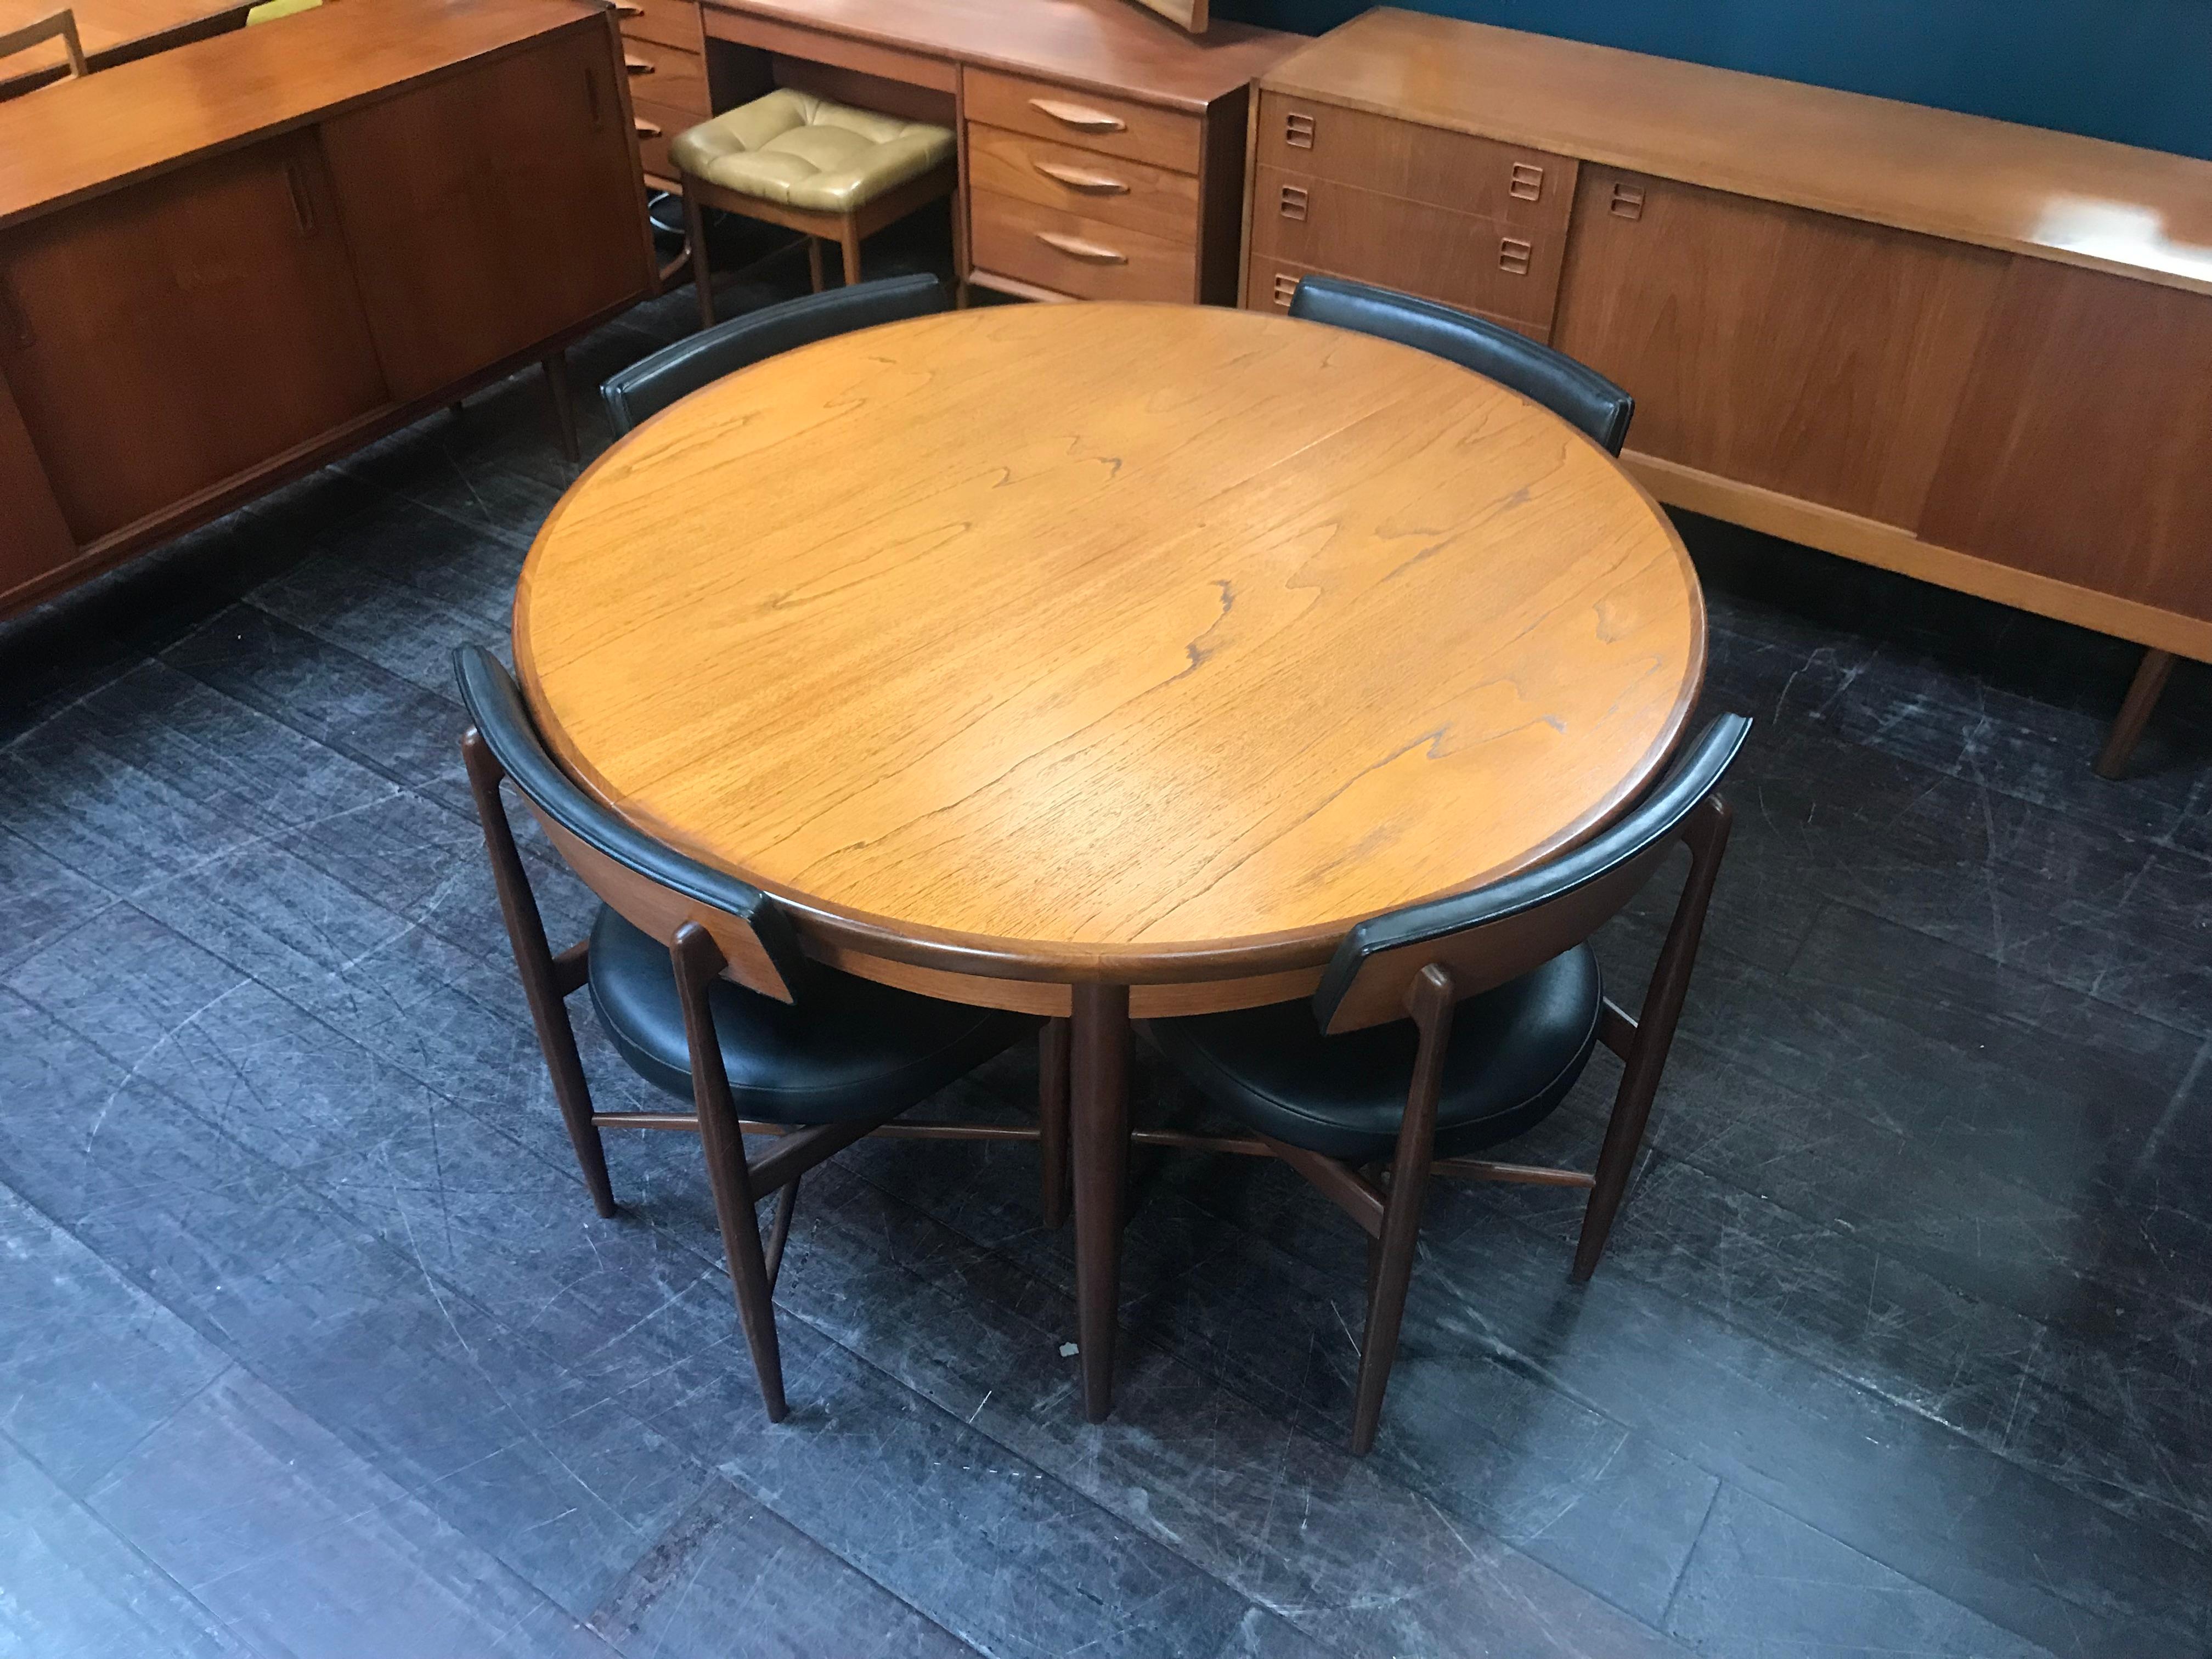 British Midcentury Teak Dining Table G Plan with 4 Chairs by Ib Kofod-Larsen In Good Condition For Sale In Glasgow, GB